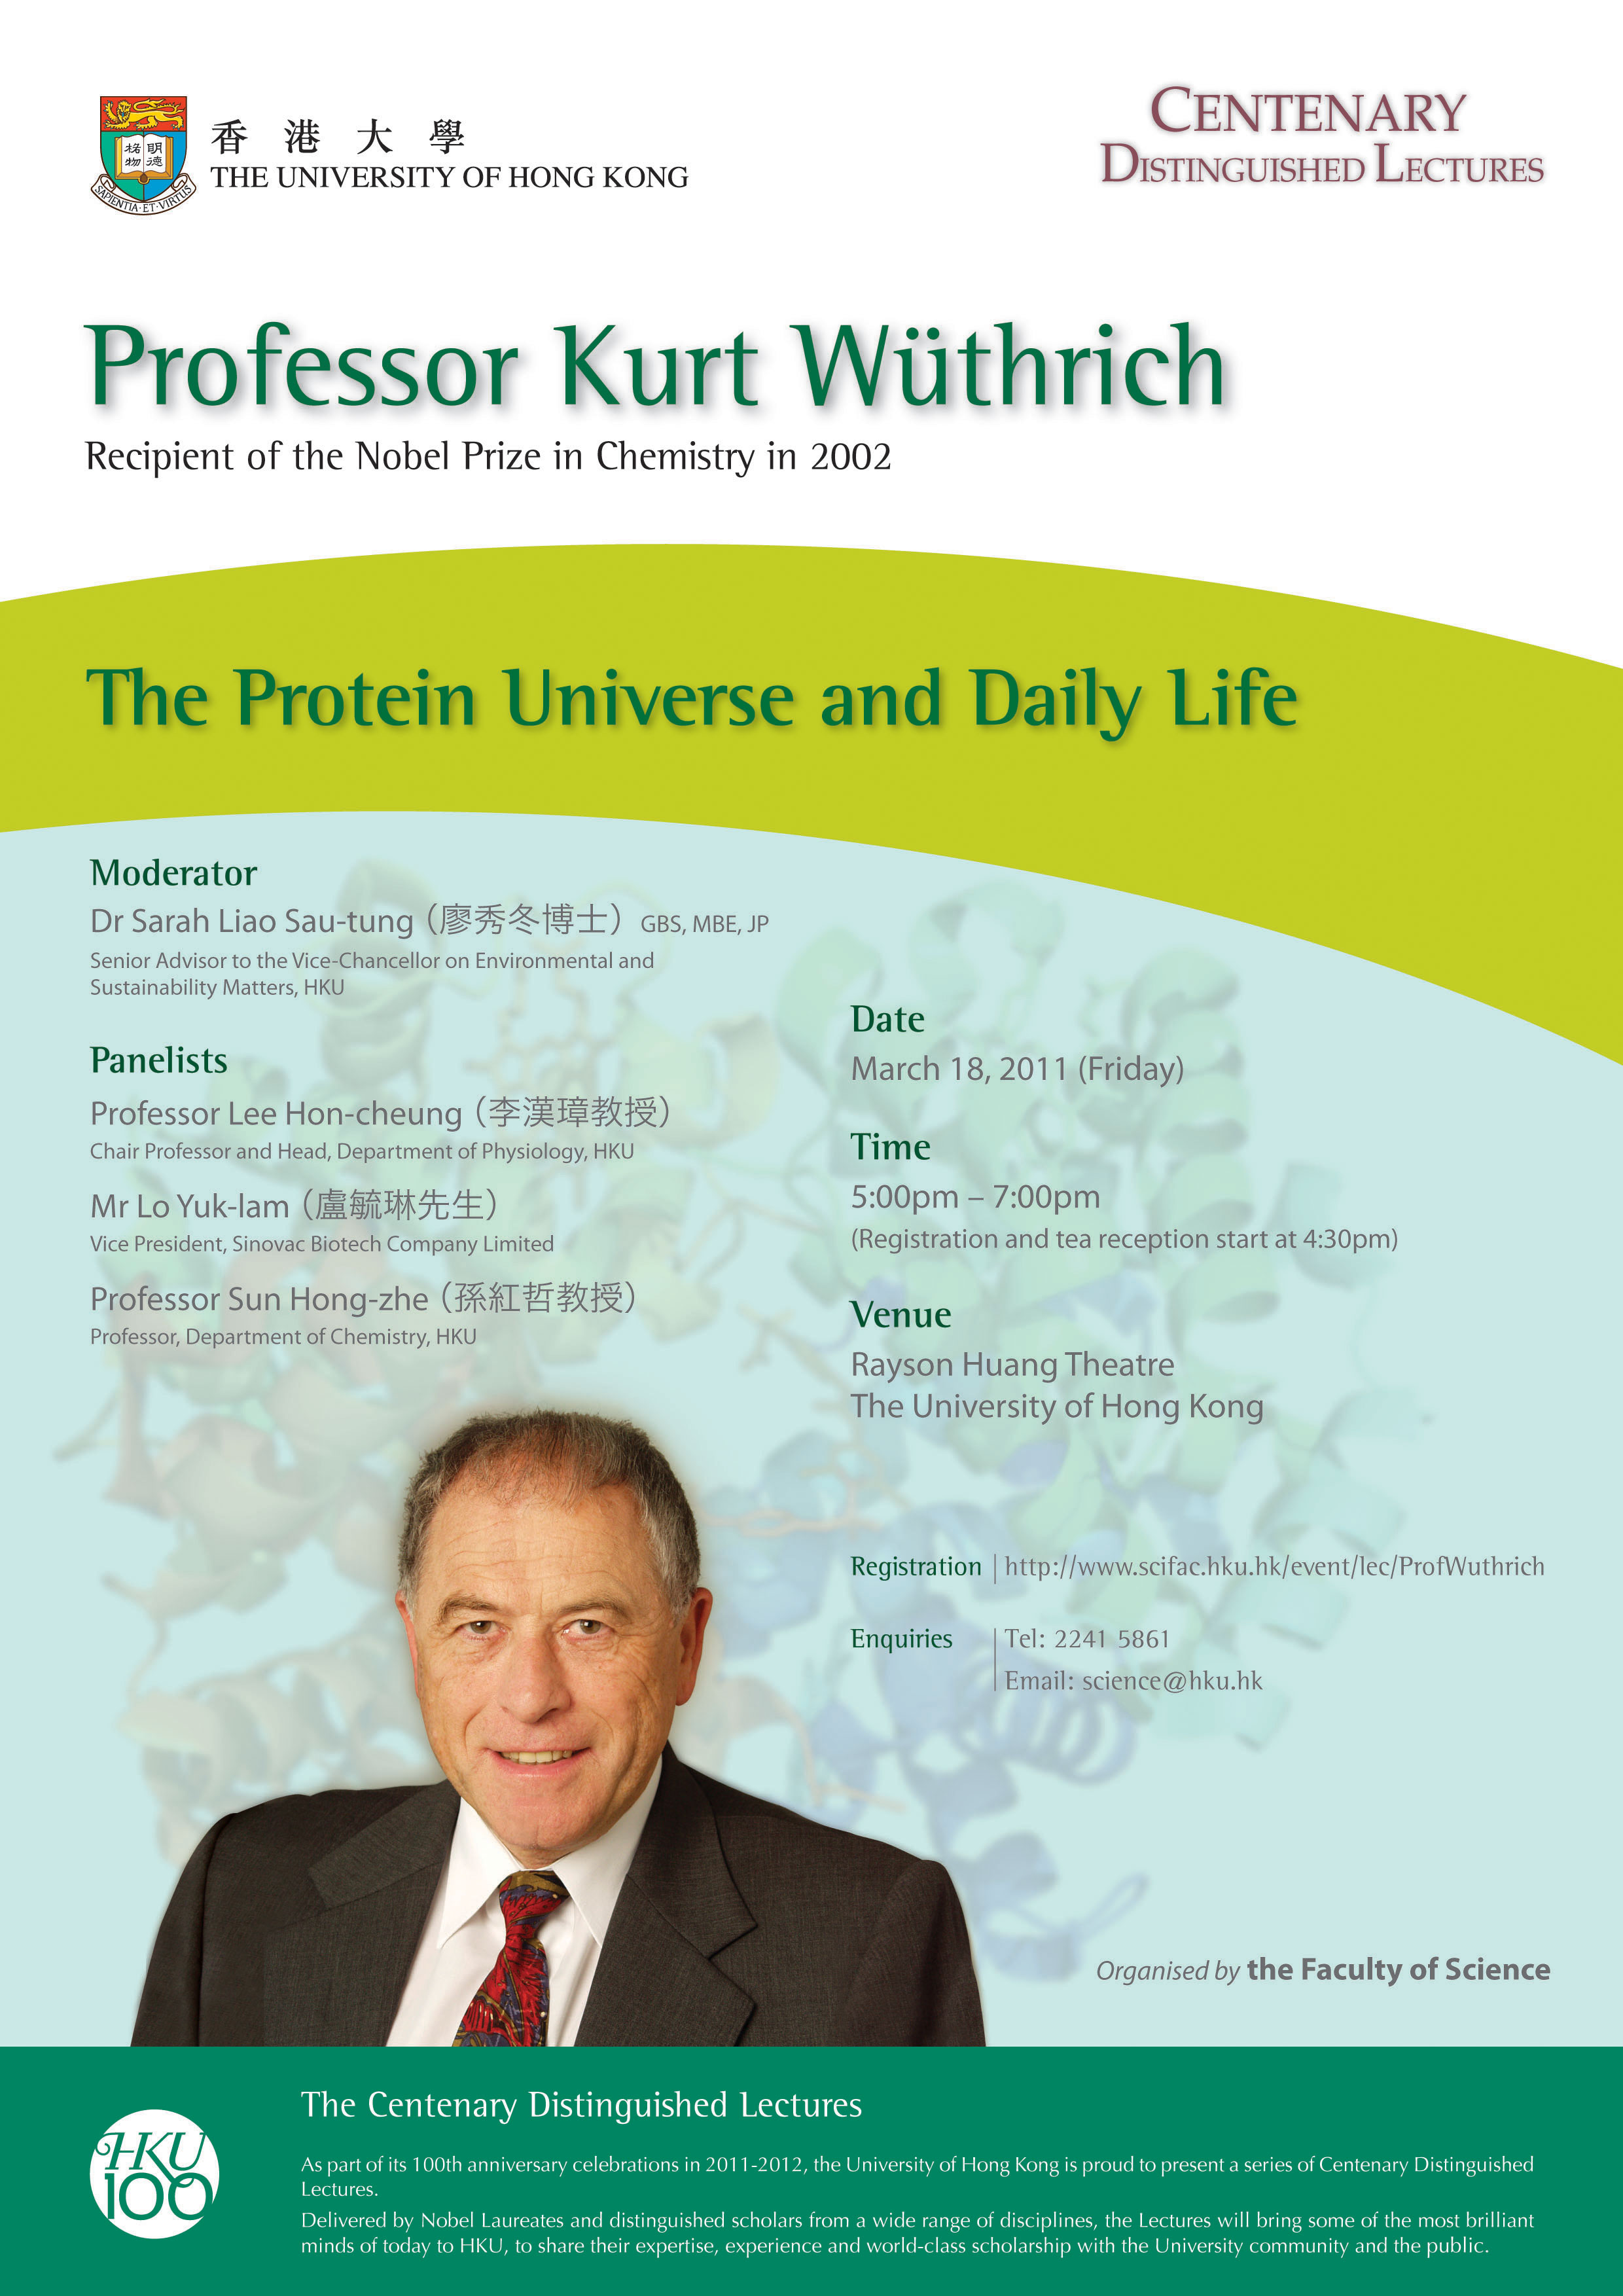 Centenary Distinguished Lecture by Professor Kurt Wüthrich - The Protein Universe and Daily Life 